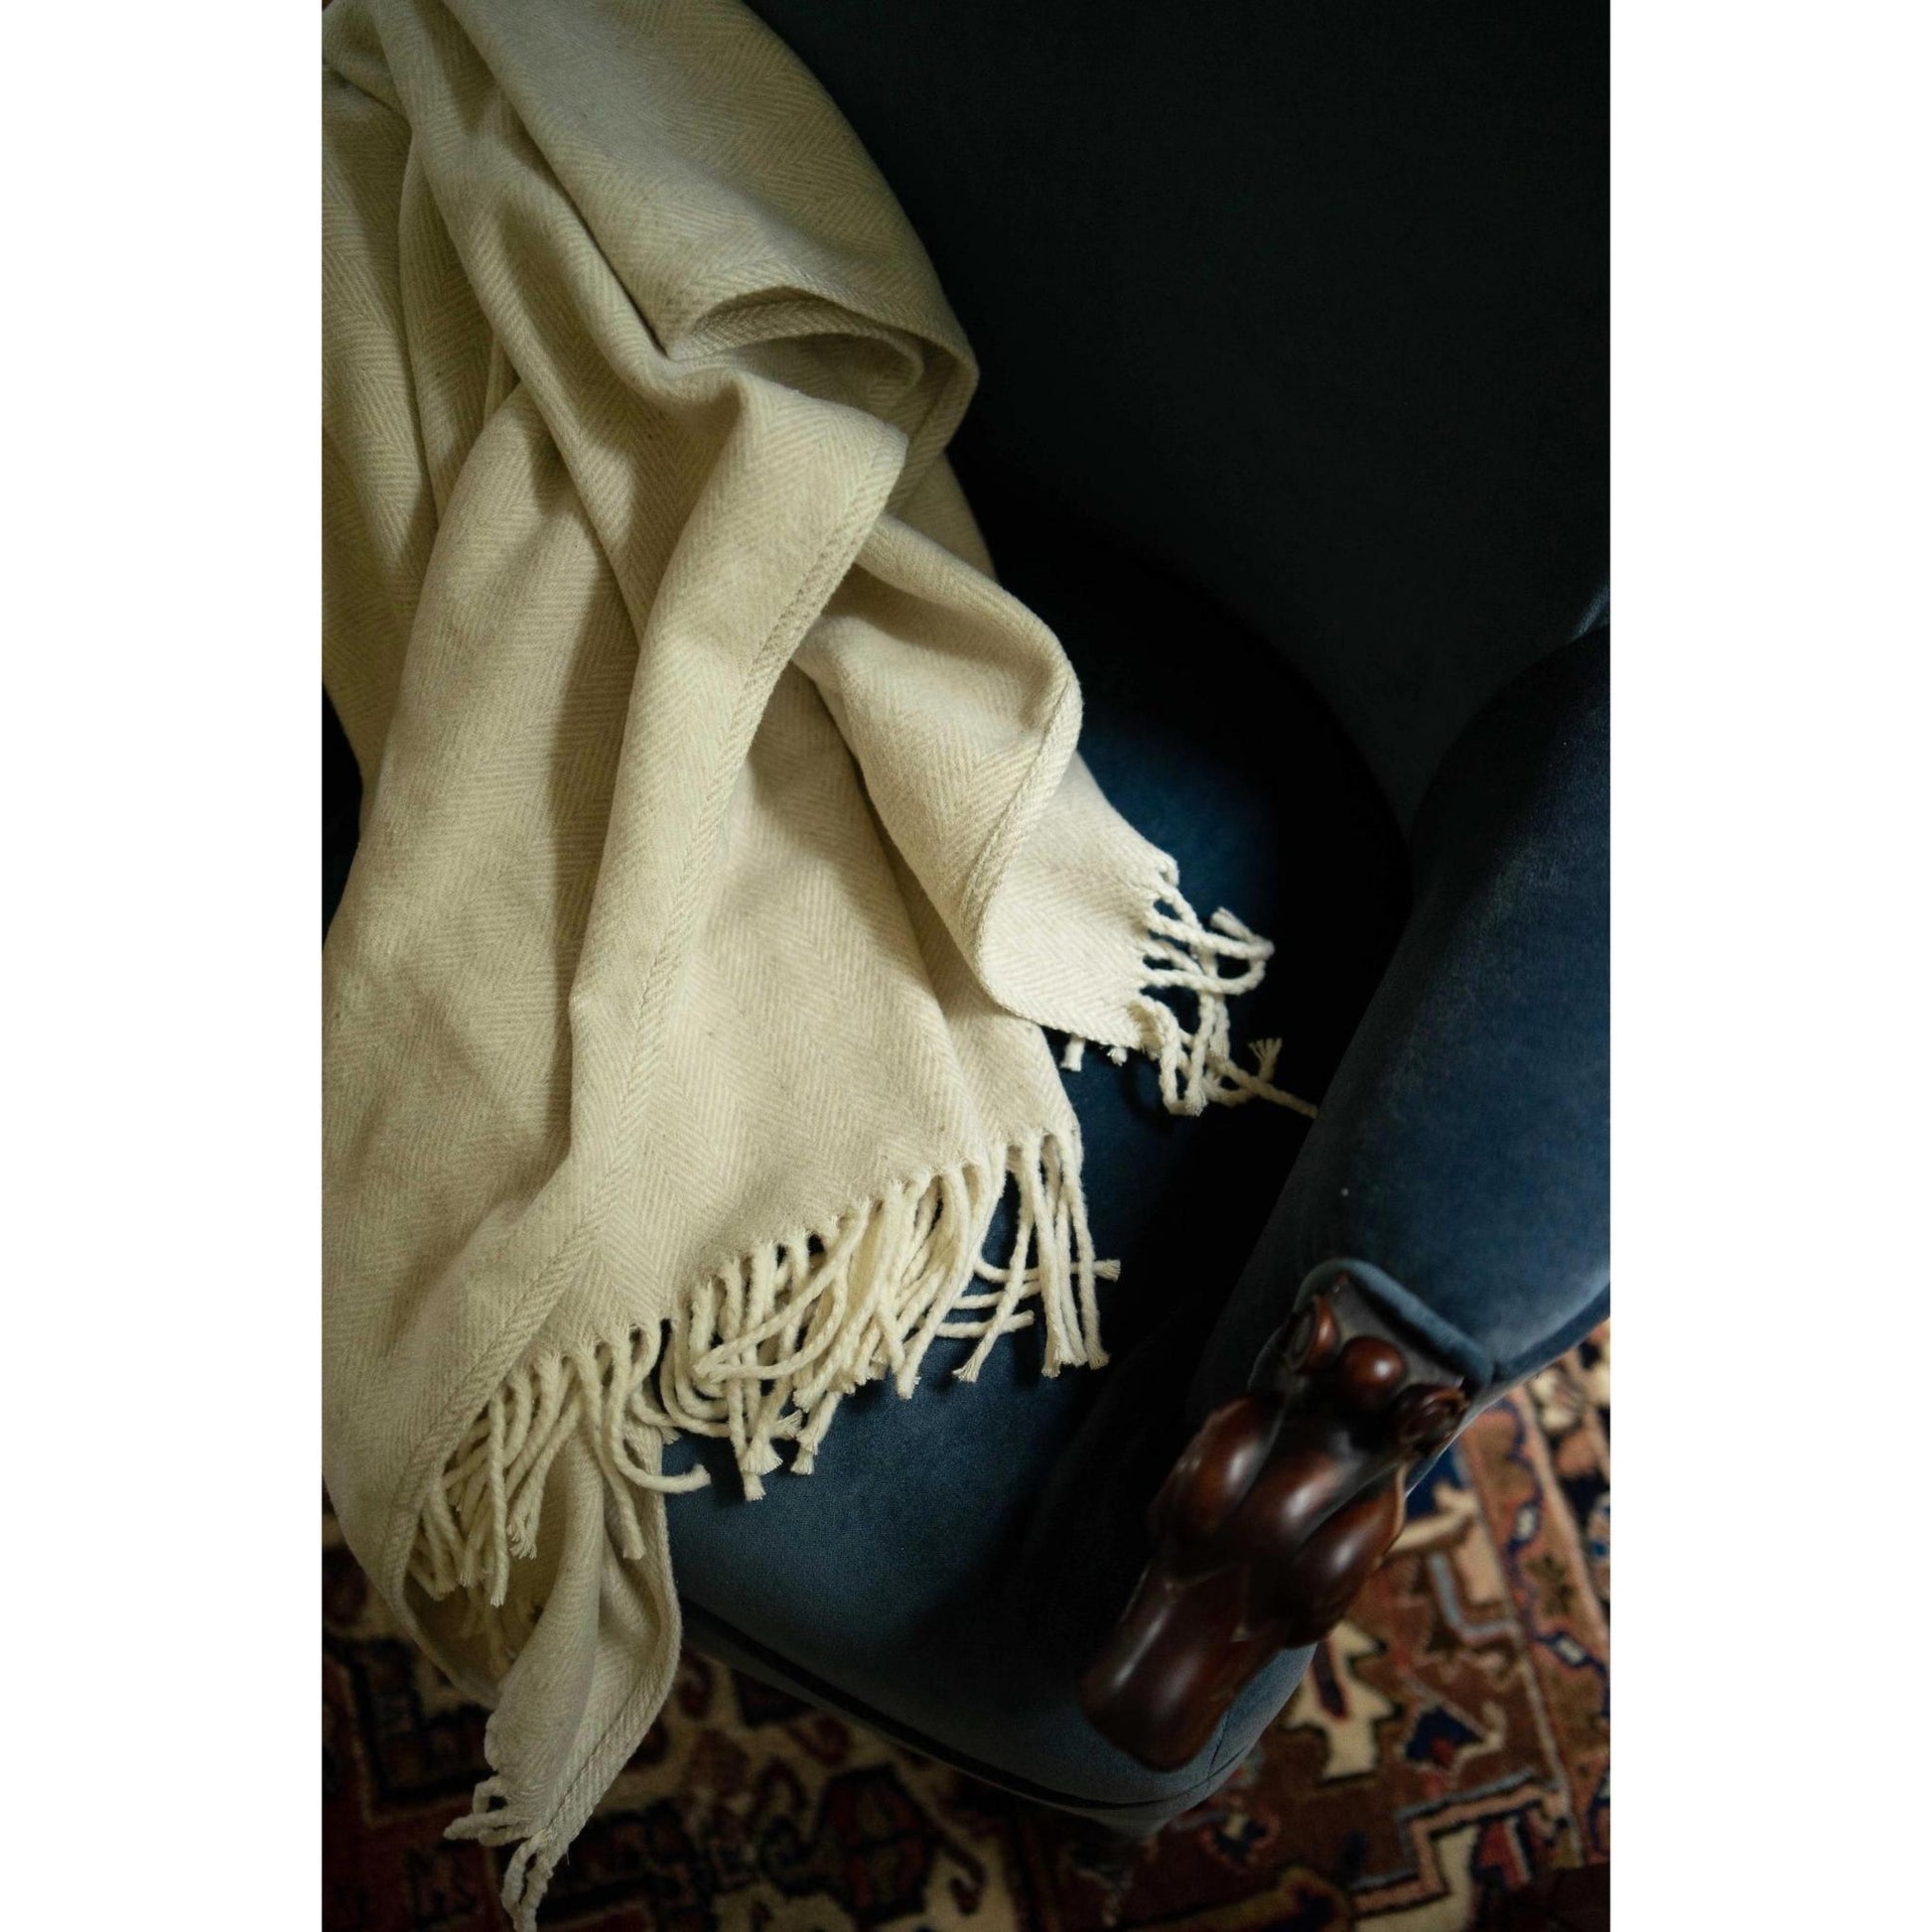 Brushed cotton throw blanket with herringbone pattern in oyster gray draped on armchair